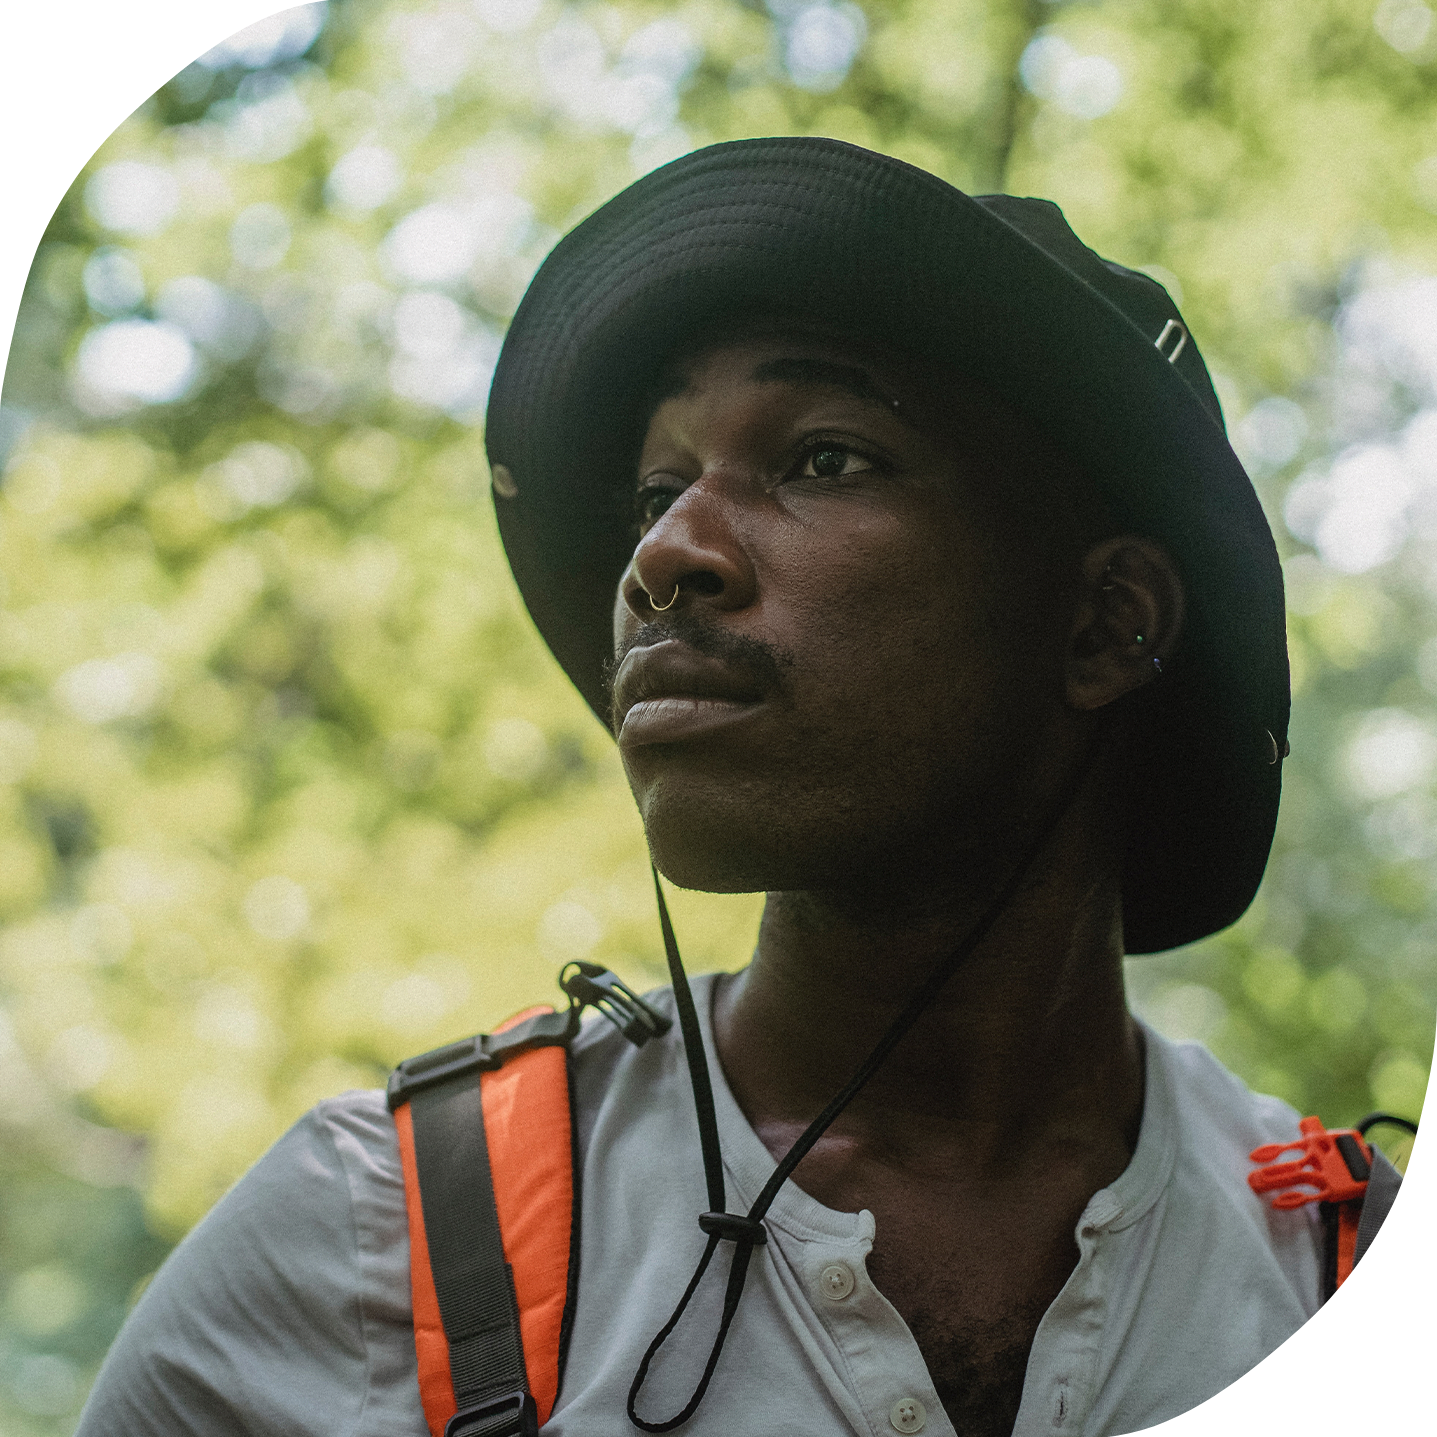 A close-up portrait of a Black non-binary person wearing hiking gear outdoors. They have a serious expression on their face.